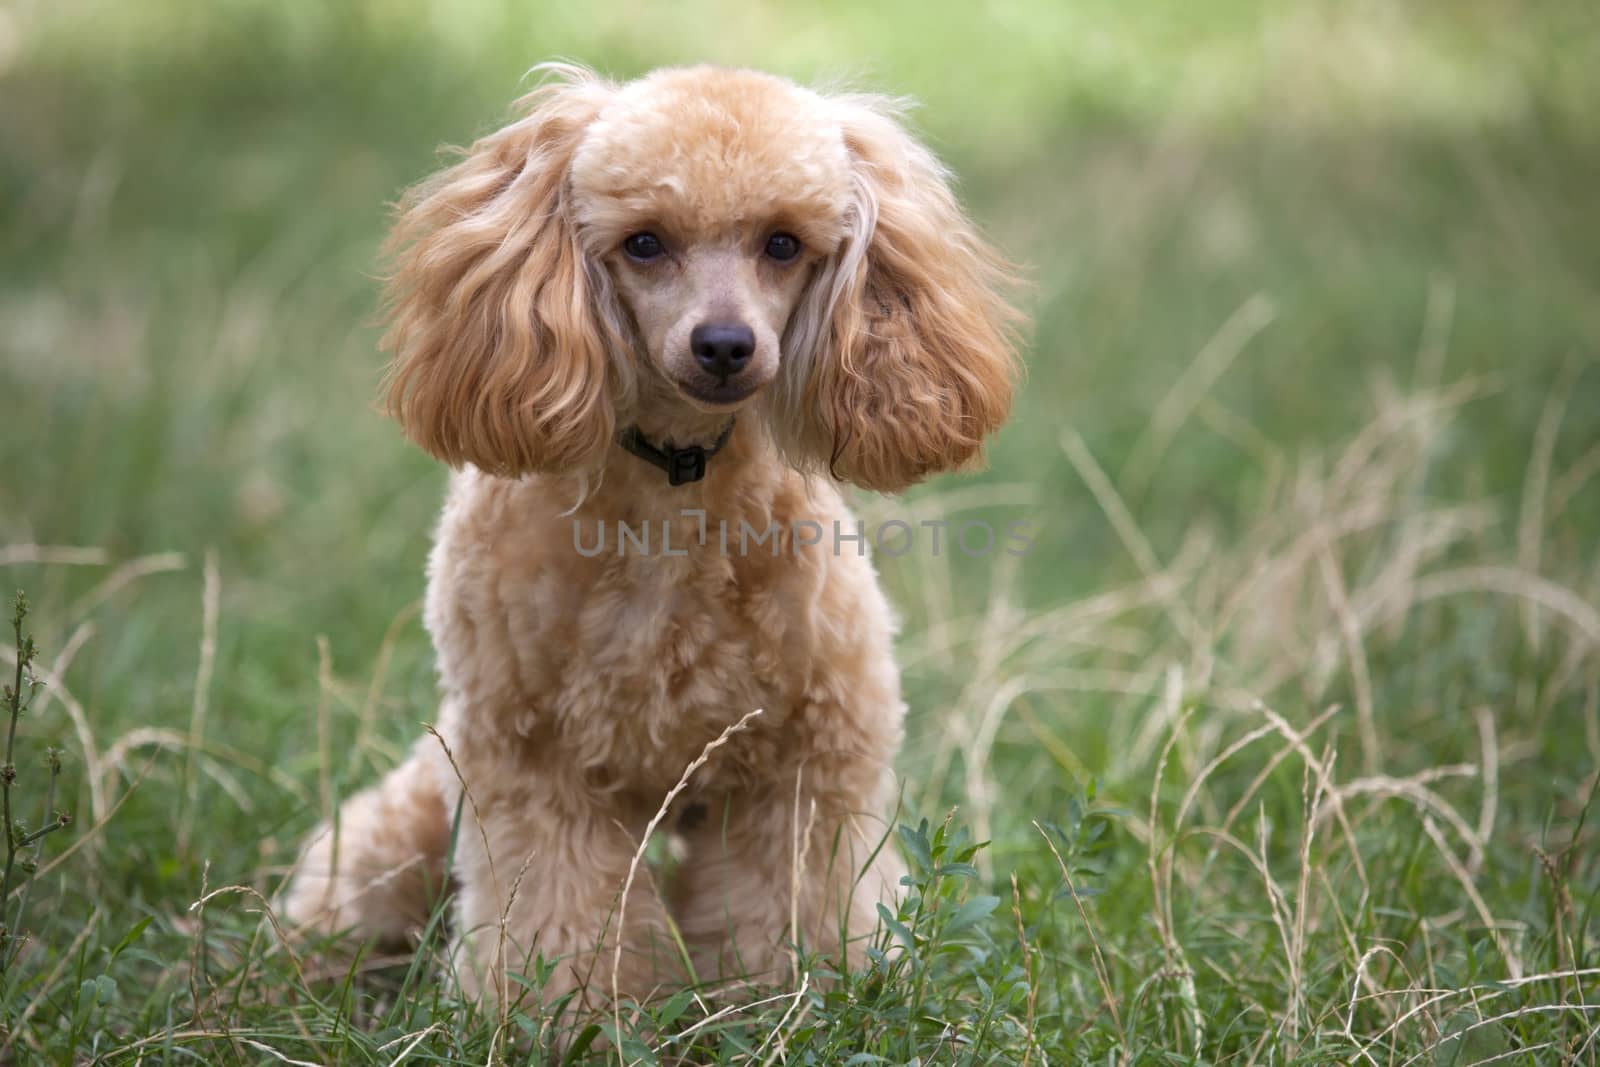 Apricot poodle standing on the grass.